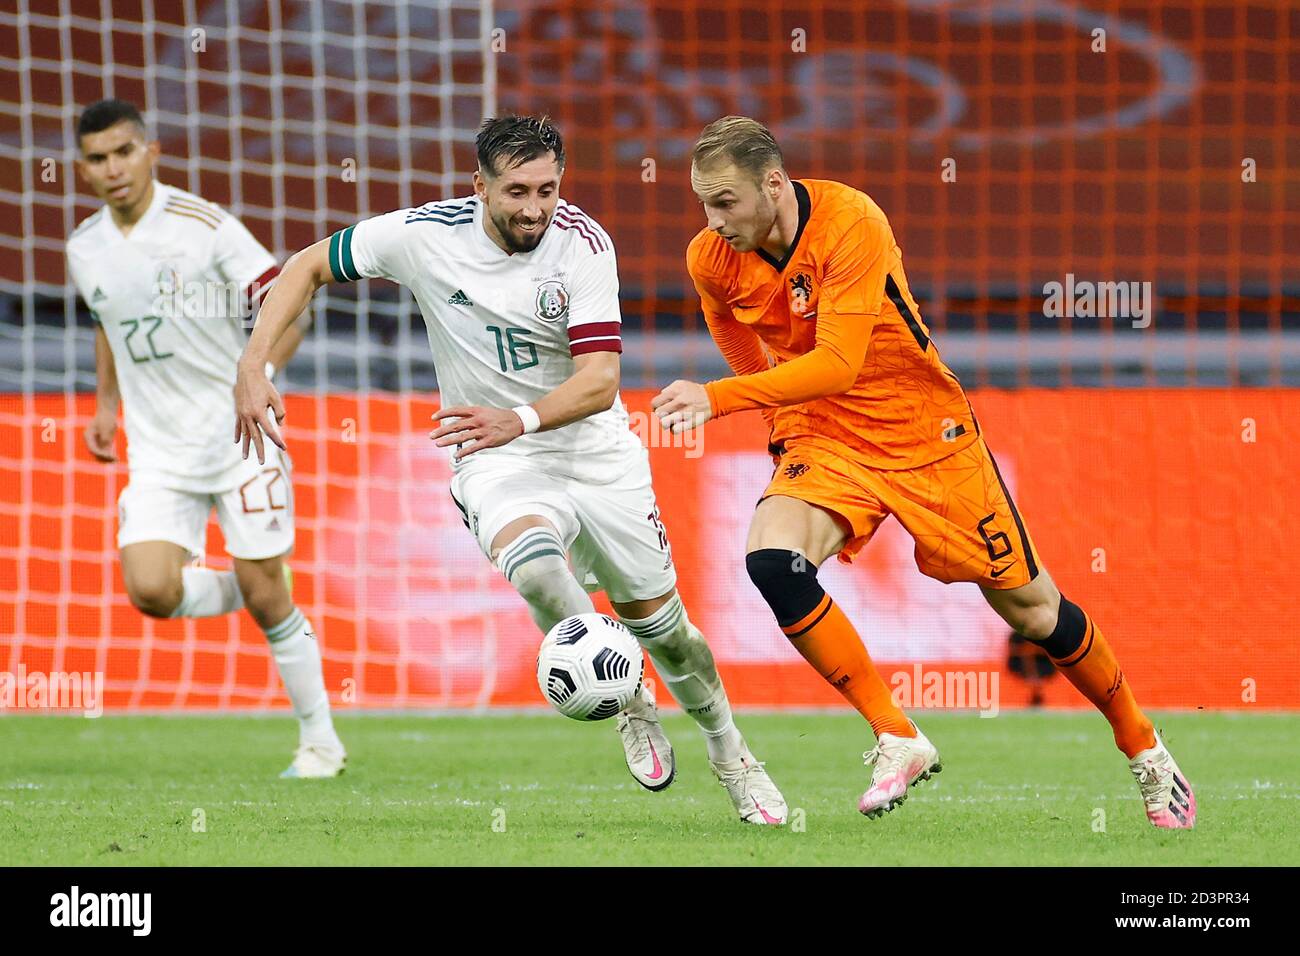 Amsterdam, Netherlands. 07th Oct, 2020. AMSTERDAM, 07-10-2020, JohanCruyff Arena, friendly match between Netherland and Mexico 0-1 Netherland player Teun Koopmeiners and Mexico player Hector Herrera Credit: Pro Shots/Alamy Live News Stock Photo